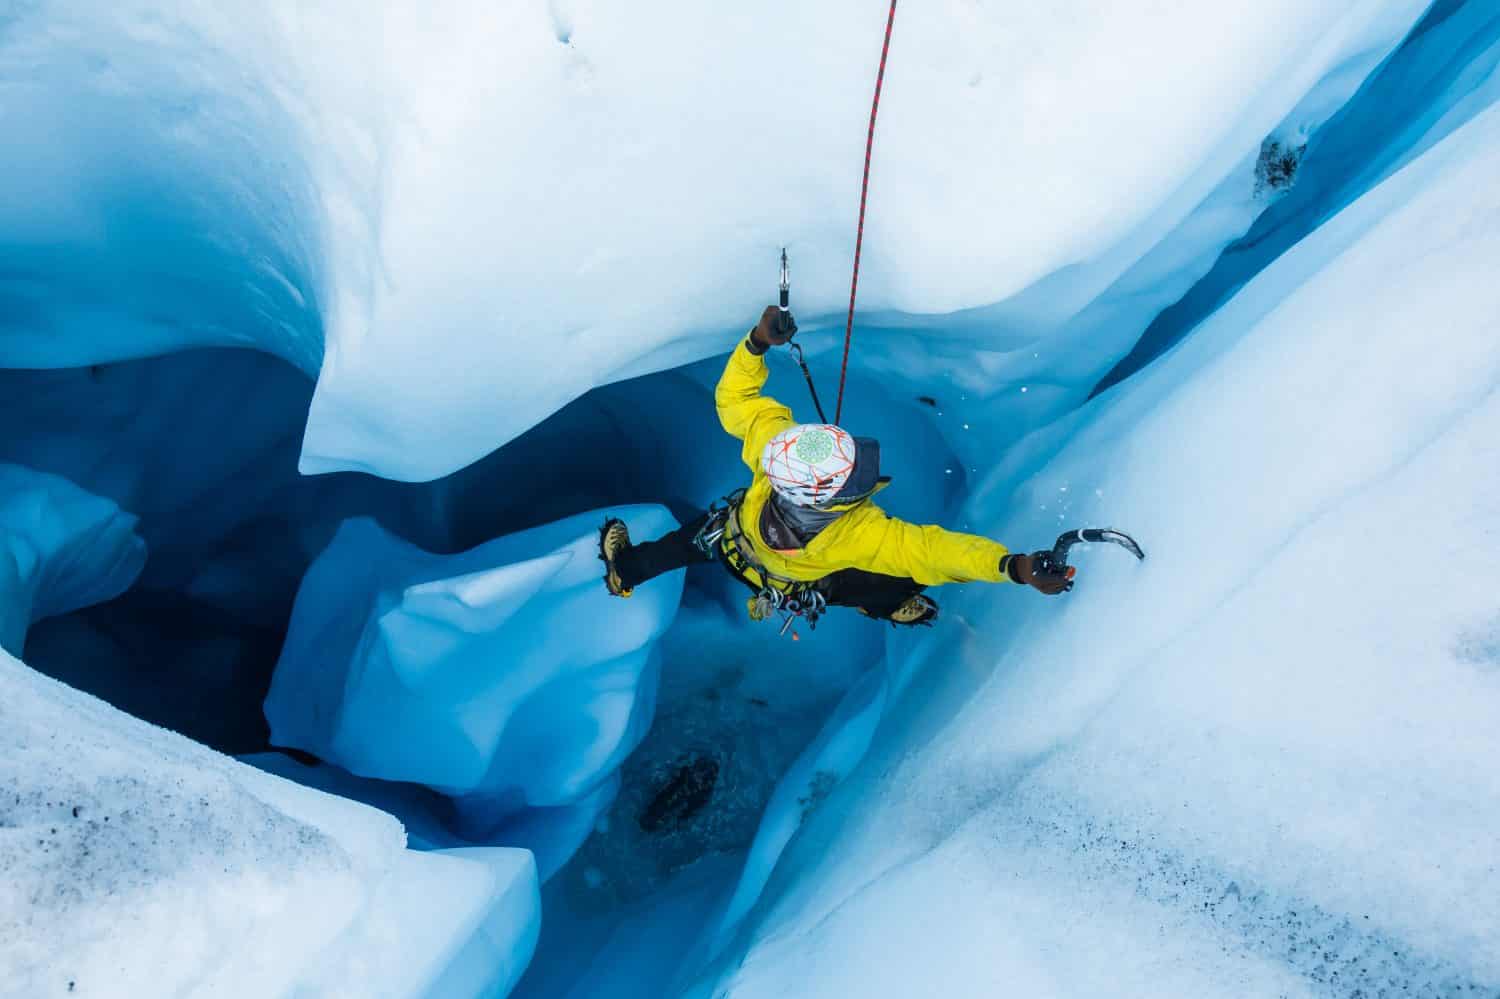 Ice climber stepping off a free standing piller inside an ice cave as he climbs out the top of the cave.